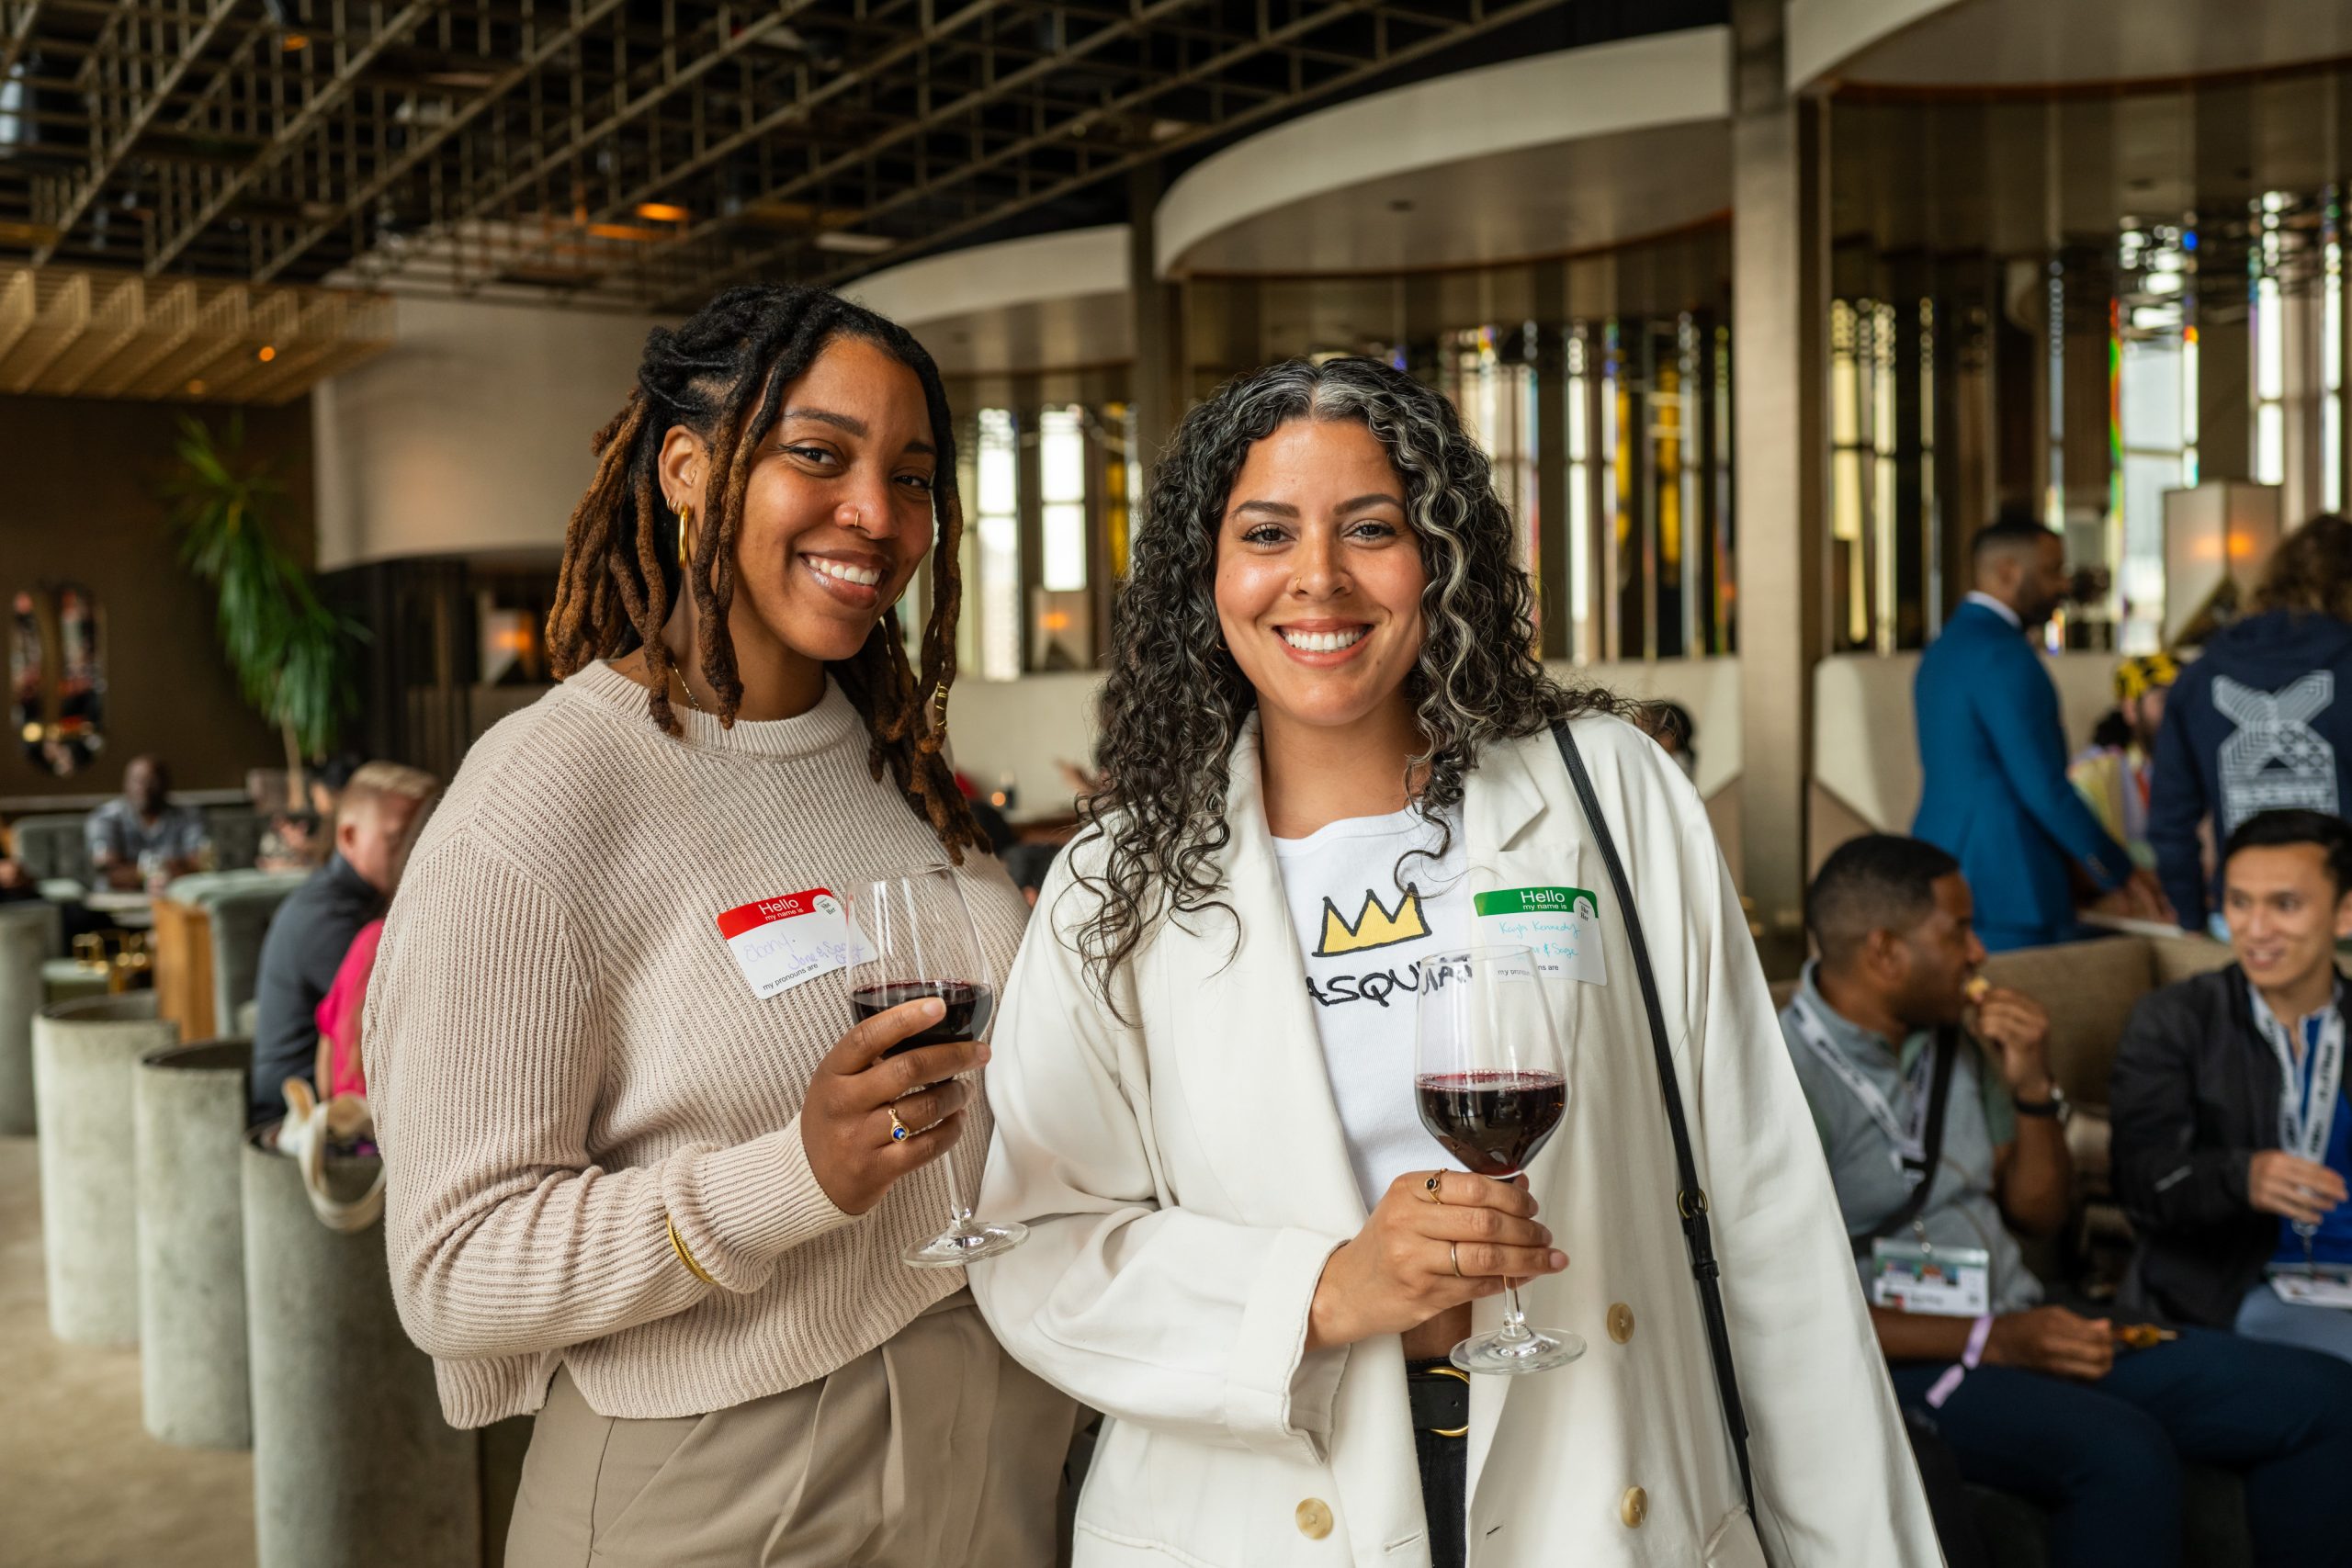 Diversity-focused networking event at SXSW